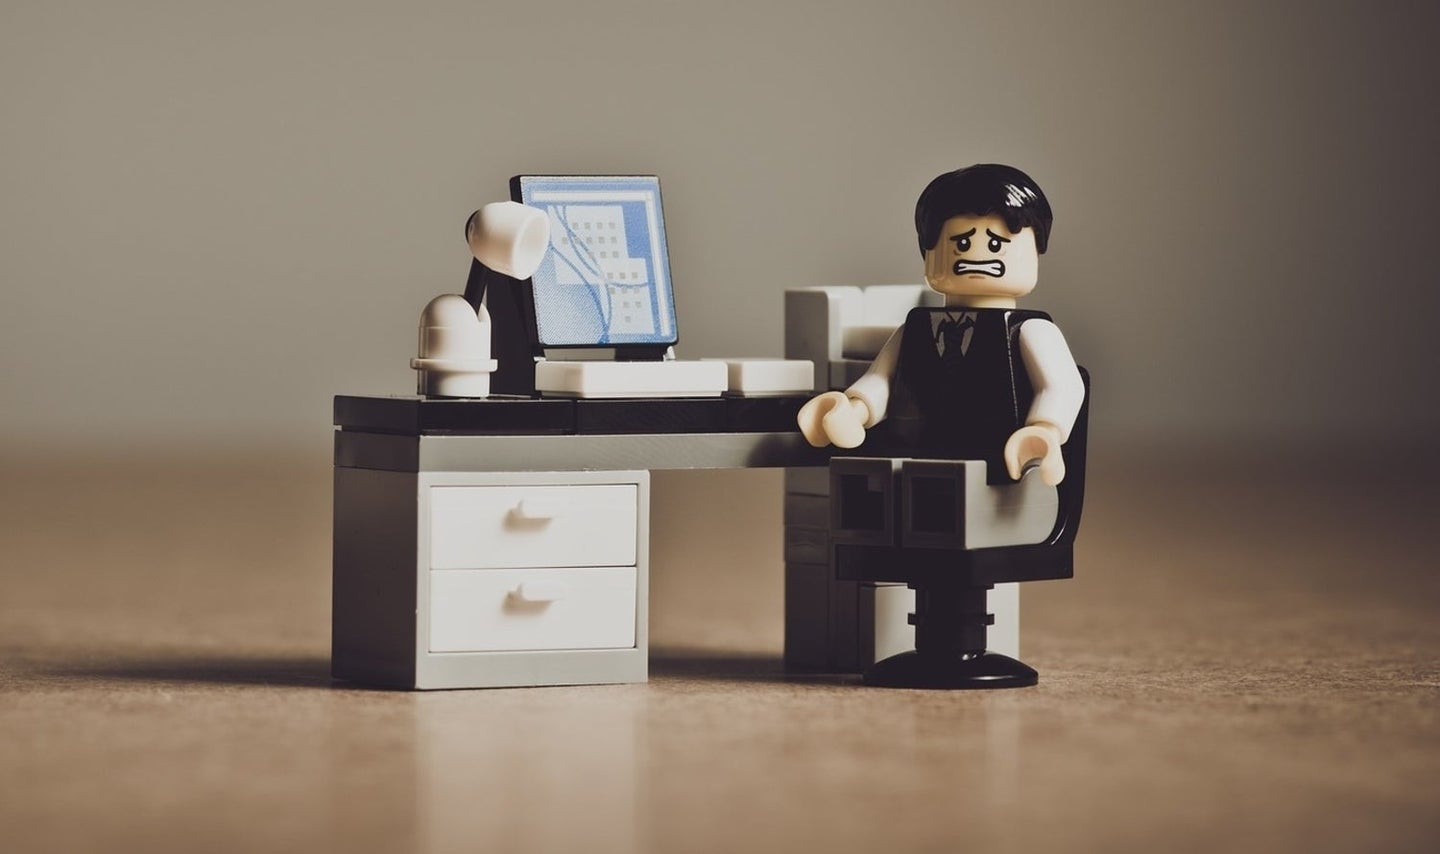 A Lego figure sitting at a desk looking desperate because he just got hacked.